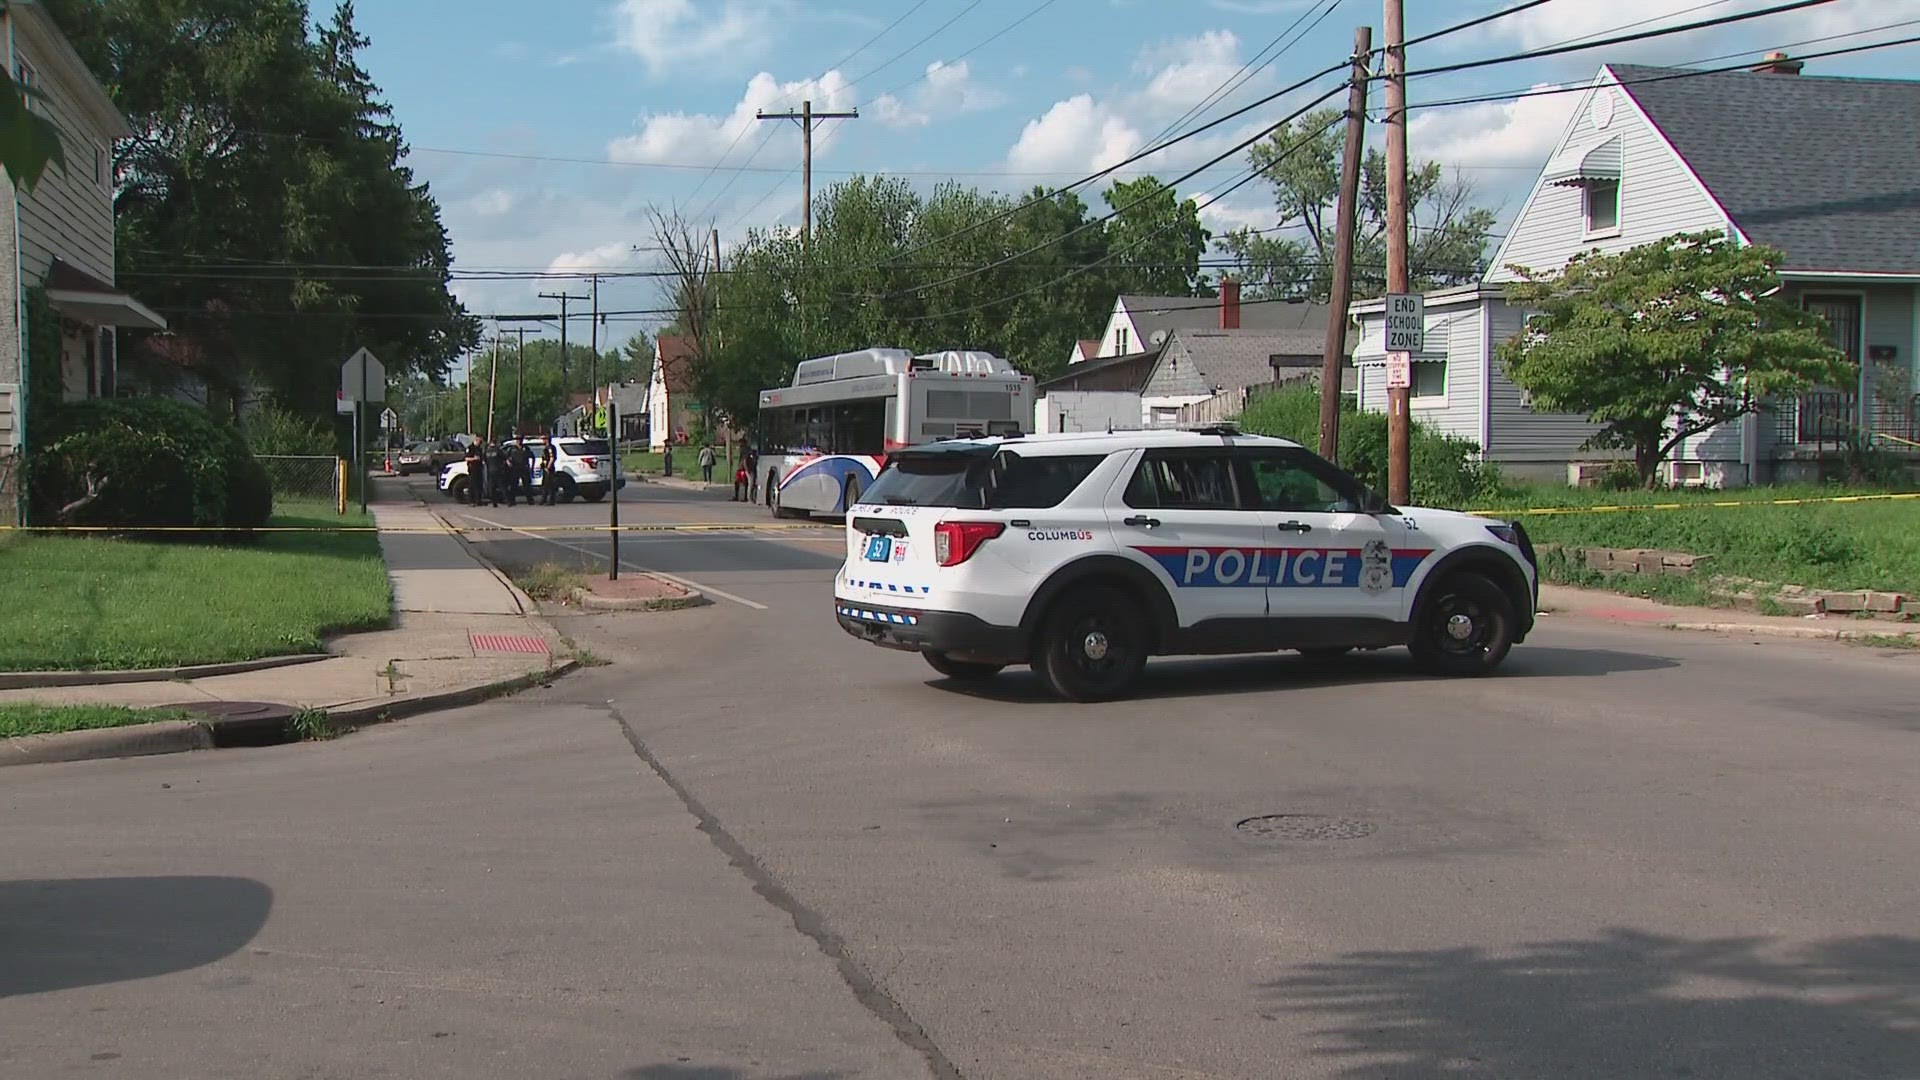 COTA will no longer be stopping at the intersection of Hamilton and East 20th avenues after a bullet hit a bus this week.